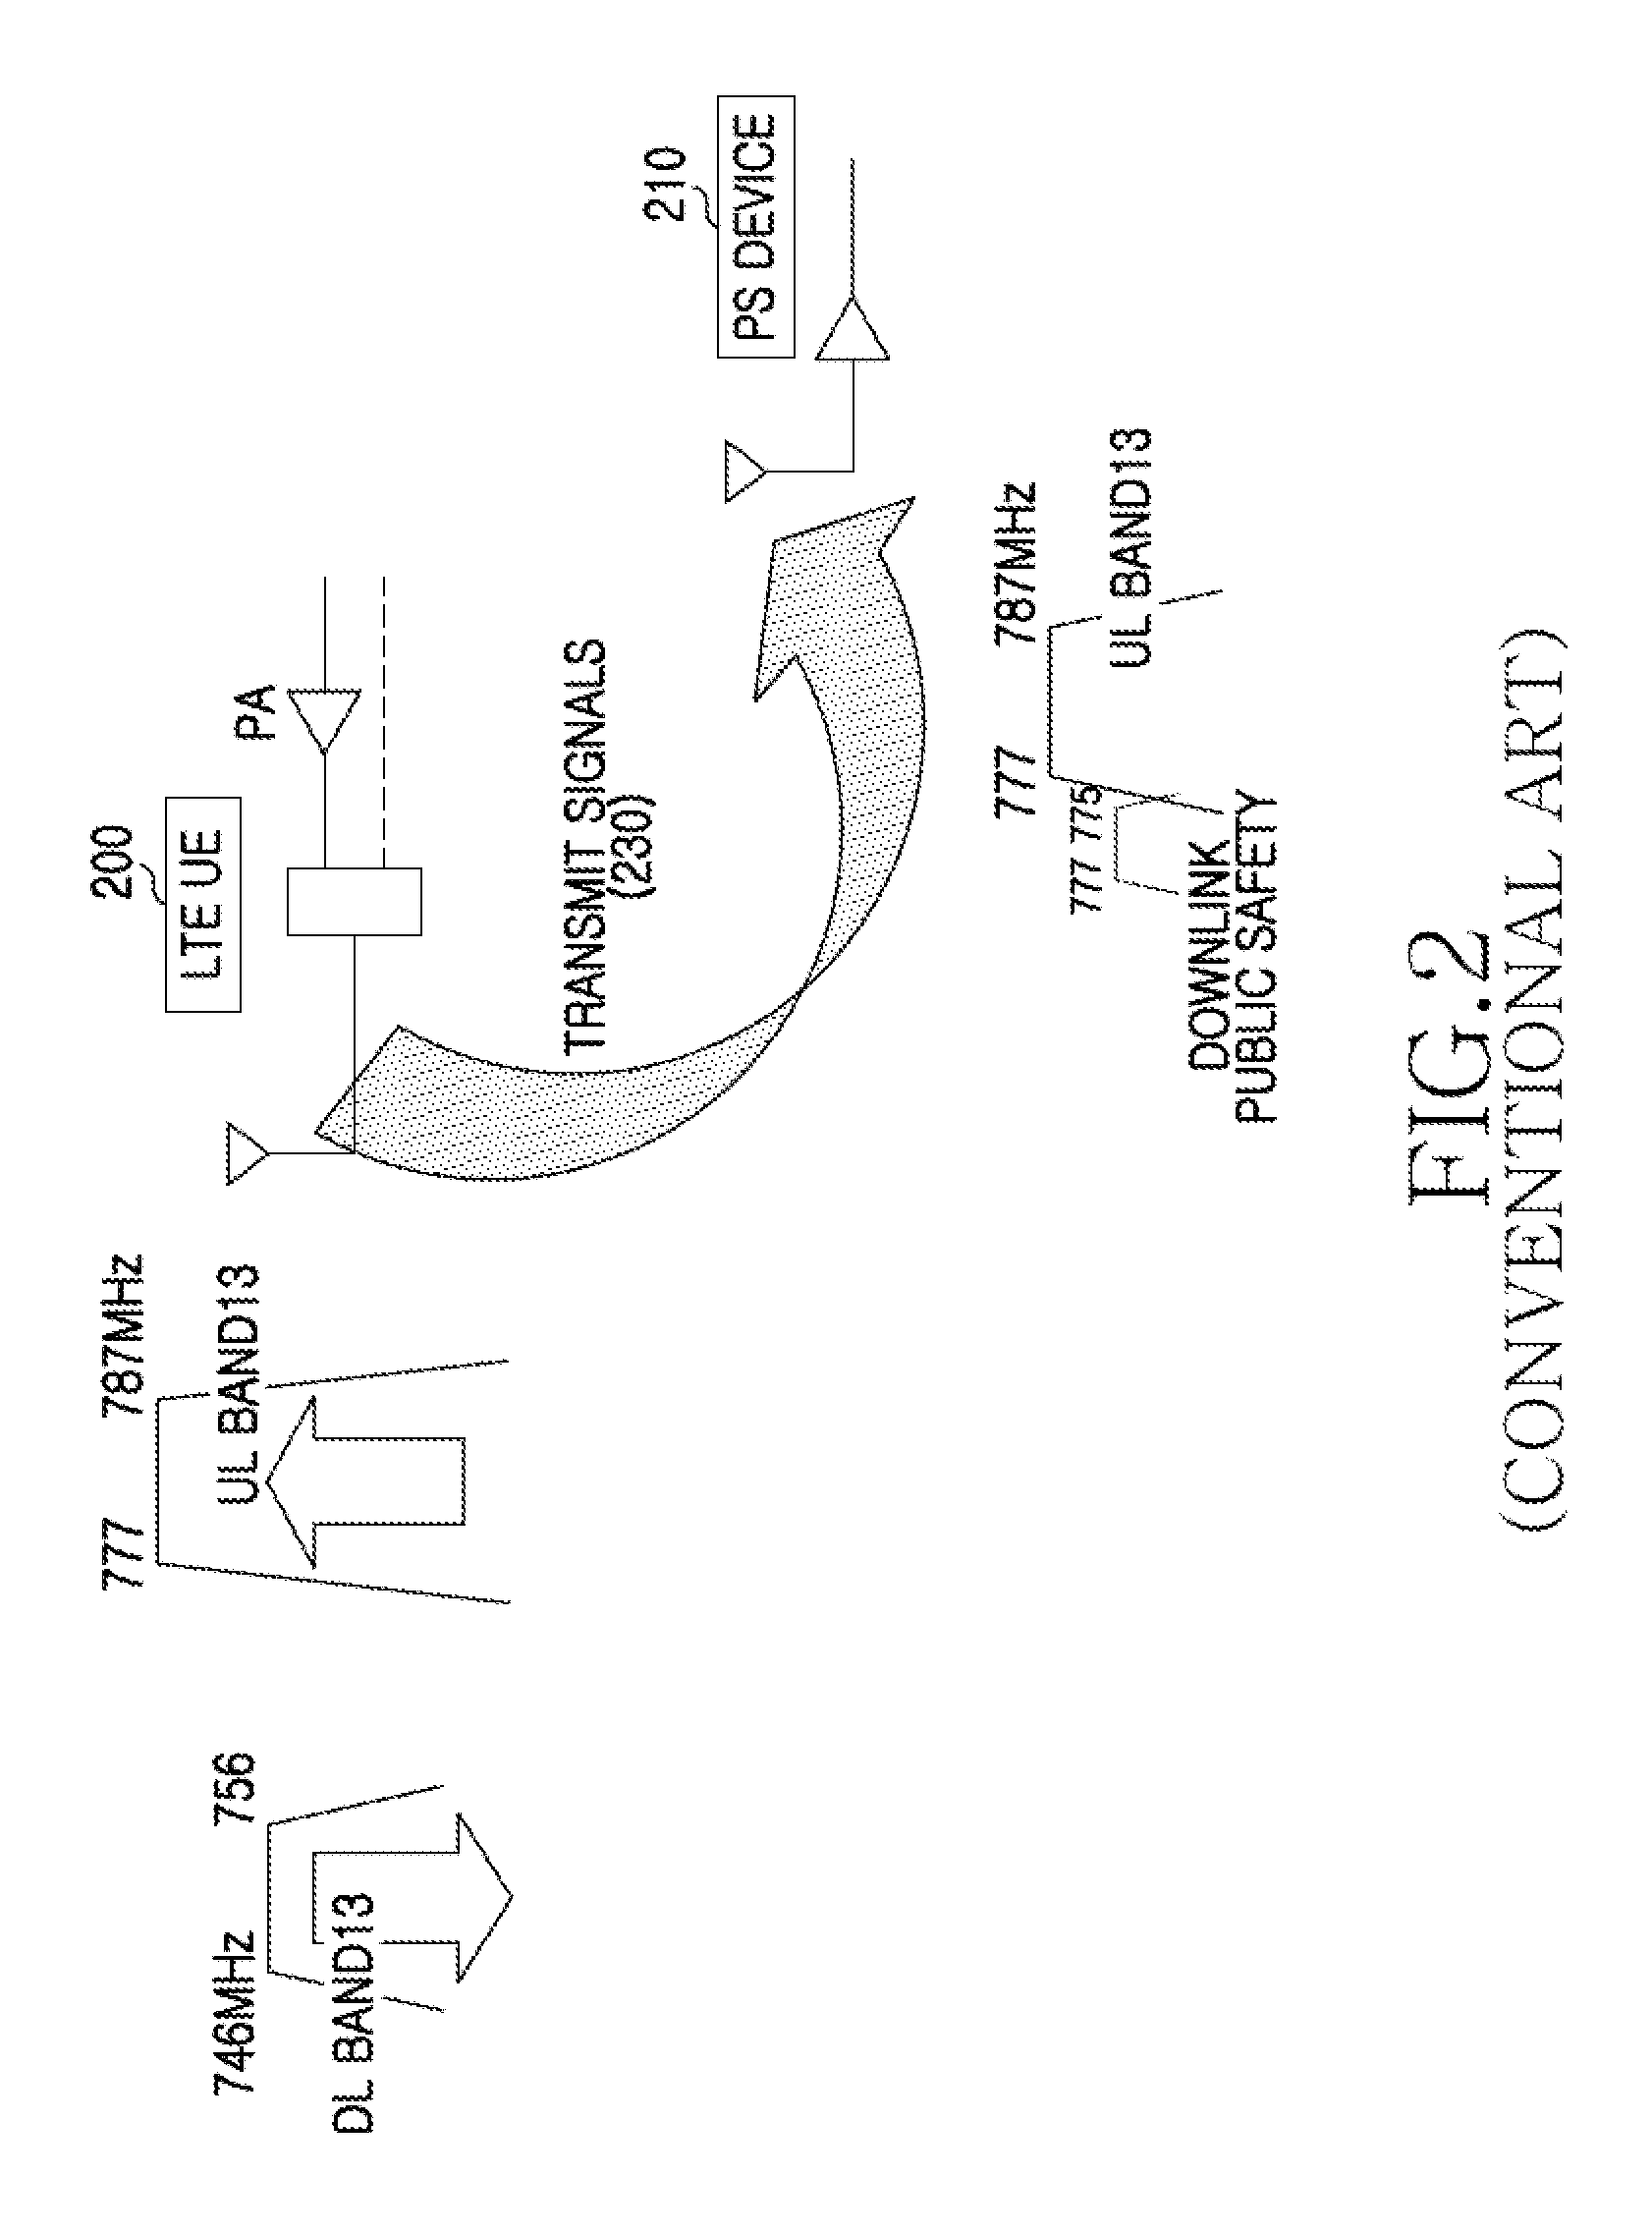 Apparatus and method for controlling interference in a wireless communication system